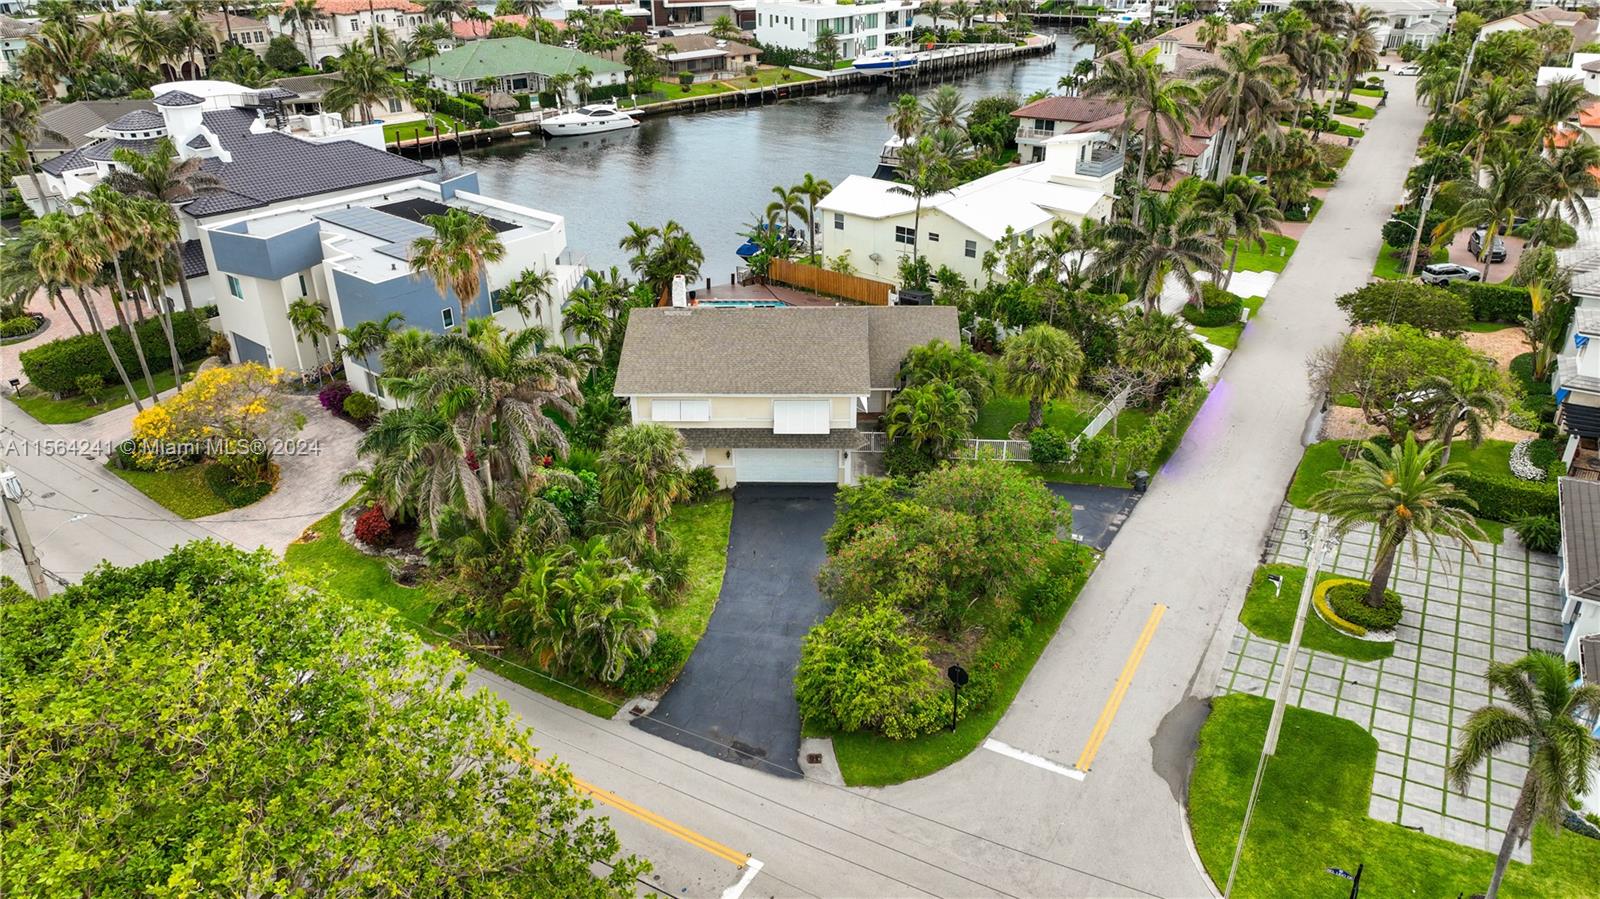 **Priced to Sell Now** Sellers are highly motivated!  Don't wait to seize the opportunity to own one of 70 unique homes in the exclusive Bel Lido Isle neighborhood.  The spacious home offers 3,484 SF to add your own personal touch and design.  Situated on a 12,327 SF corner lot, provides ample space for new ideas. Your own private dock can comfortably host a 19-22FT boat.  Recent survey available upon request.  This beautiful beach community of waterfront properties is a well kept secret and is Florida living at it's finest.  Act Fast!  and book your showing before it's too late.  See Broker remarks for more details.